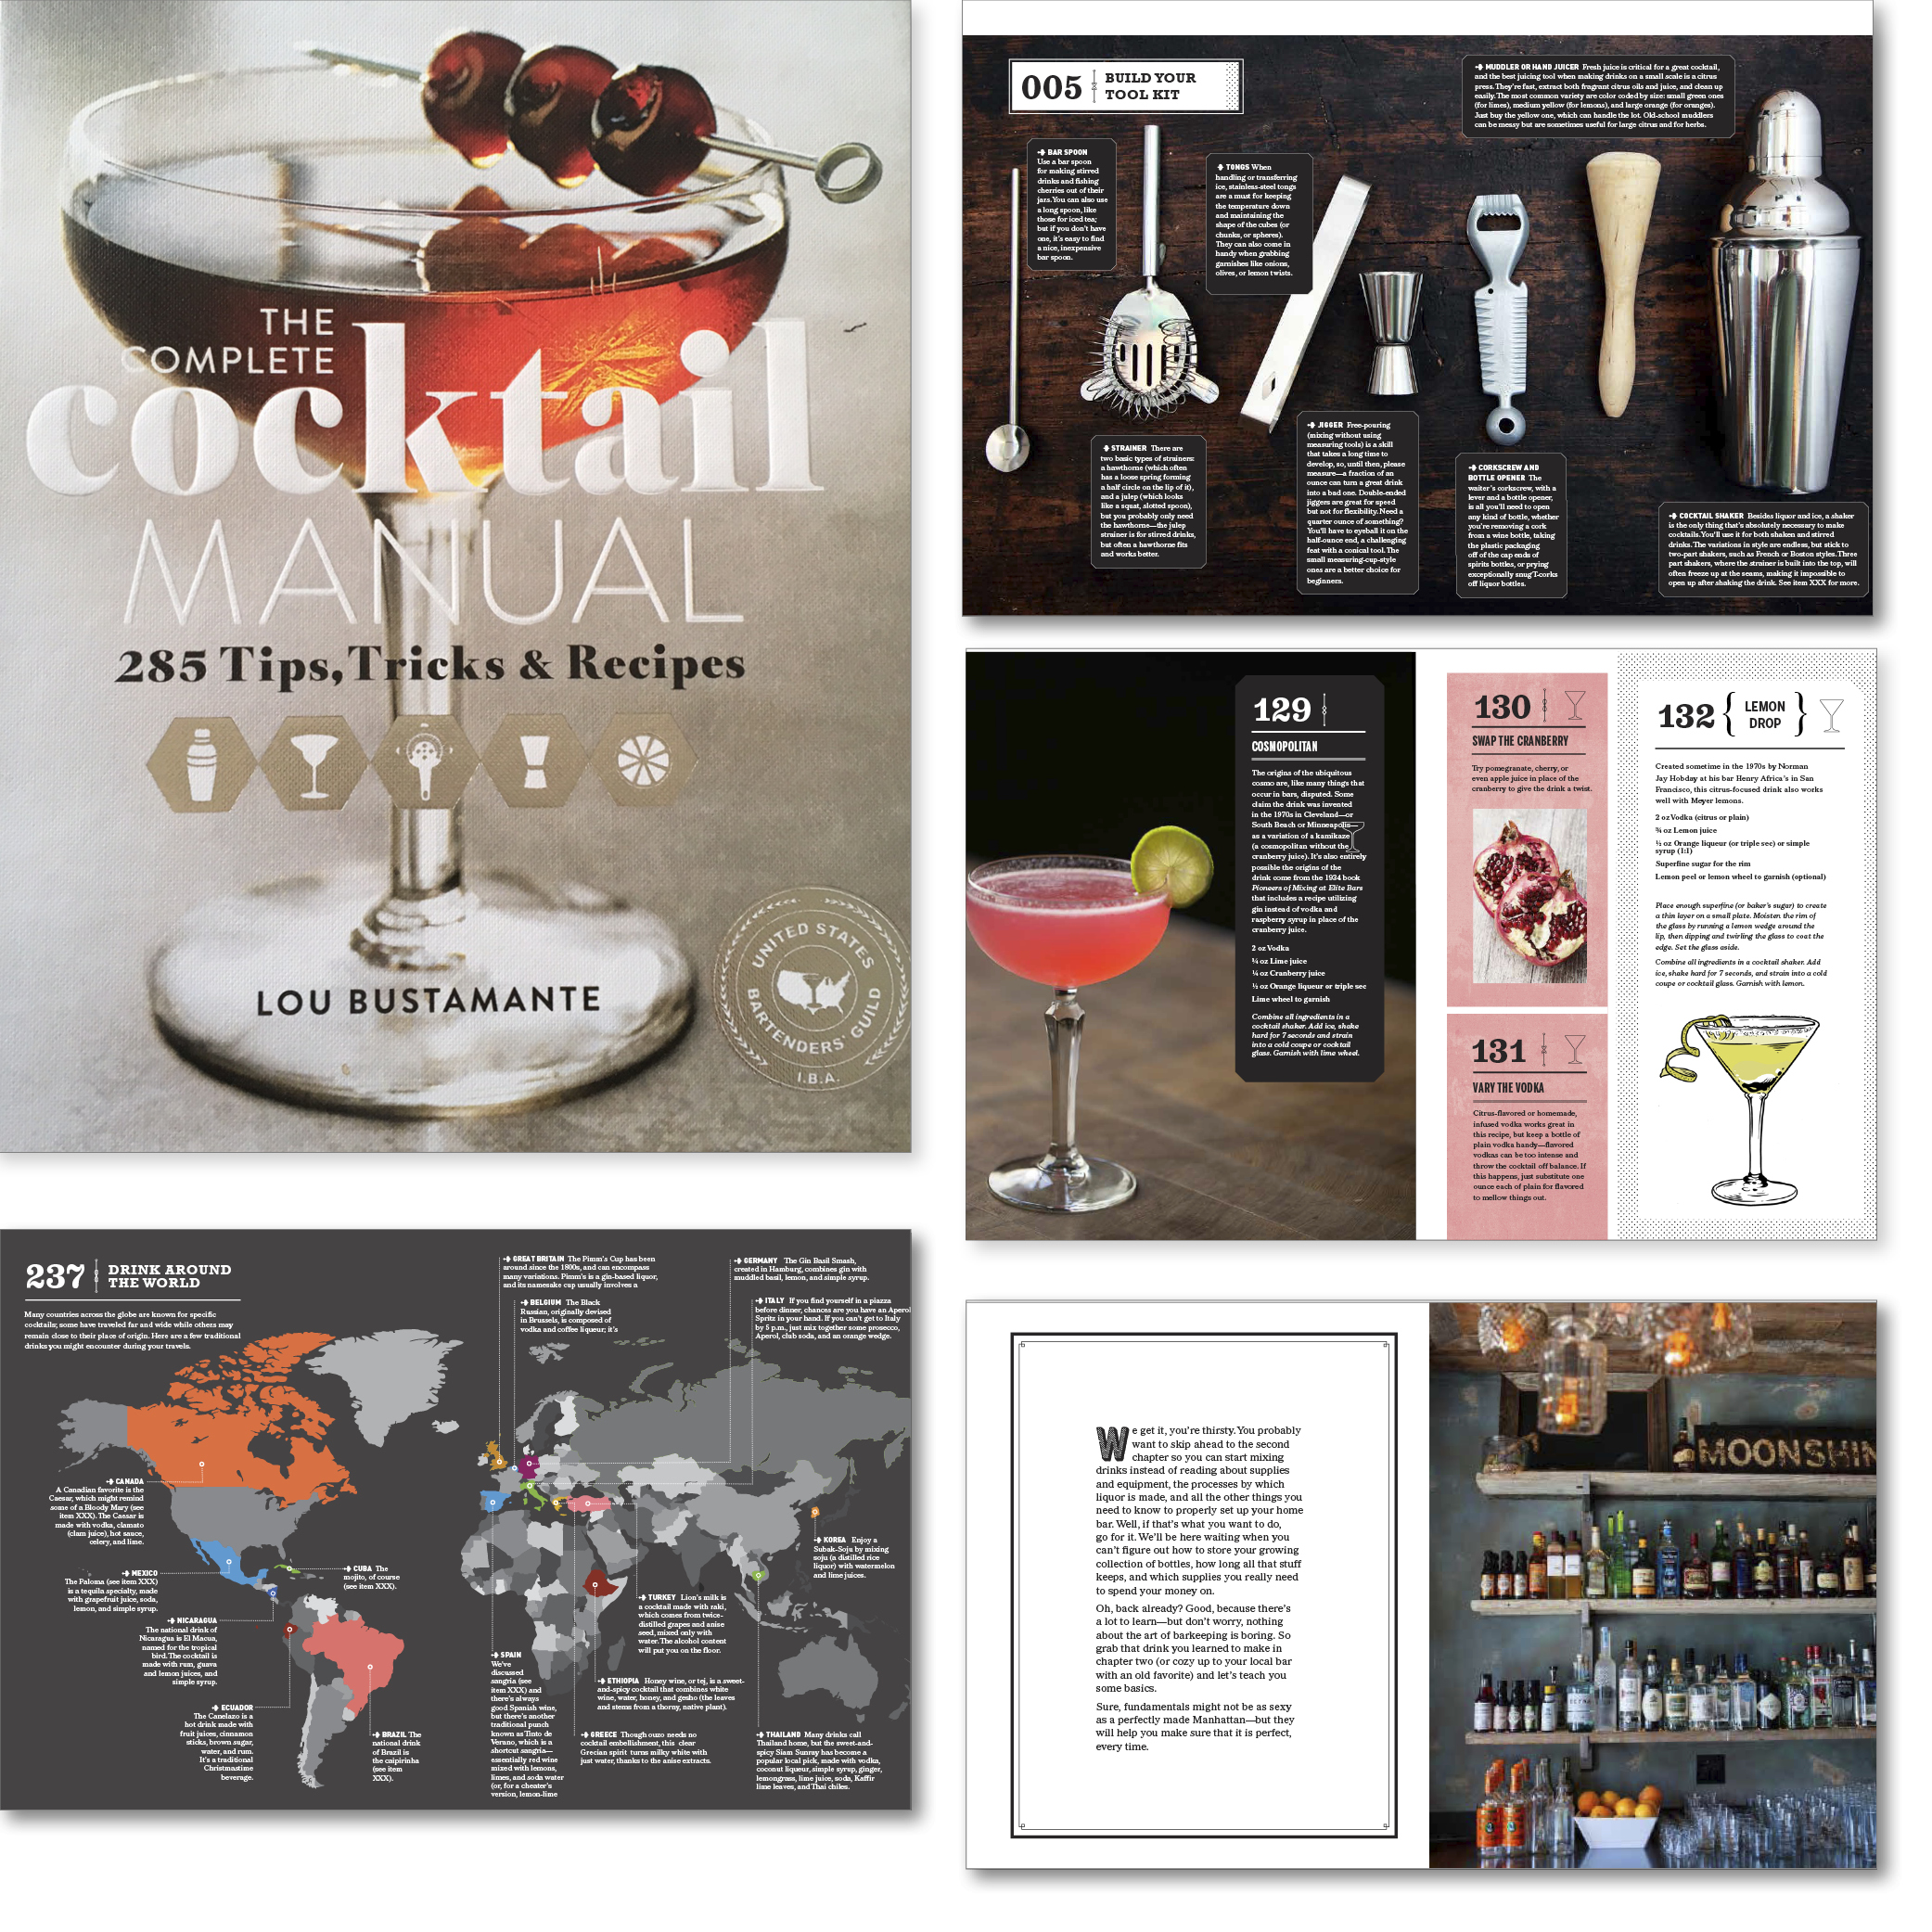 THE COMPLETE COCKTAIL MANUAL